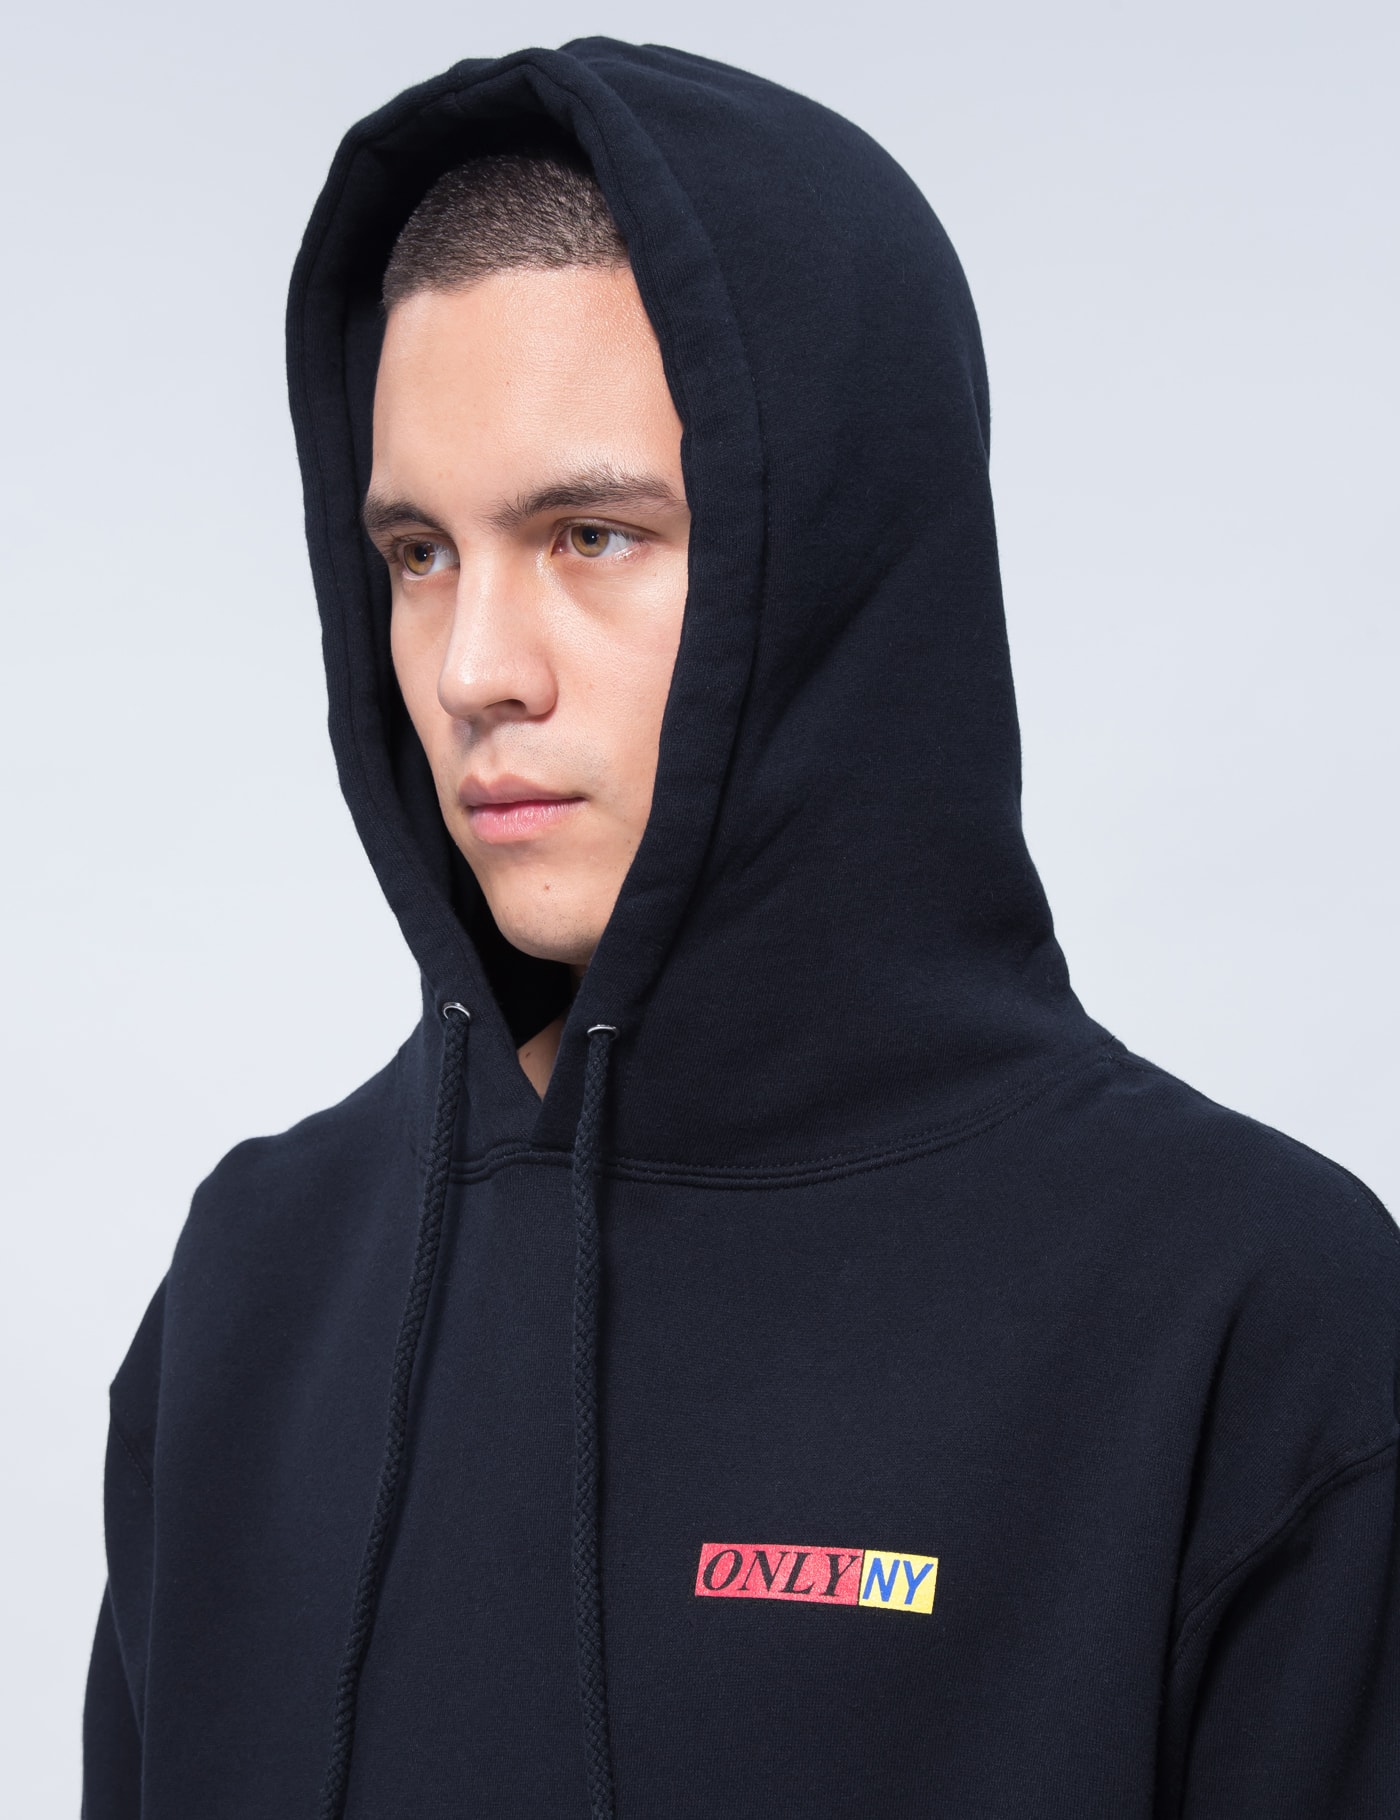 Only Ny - News Hoodie | HBX